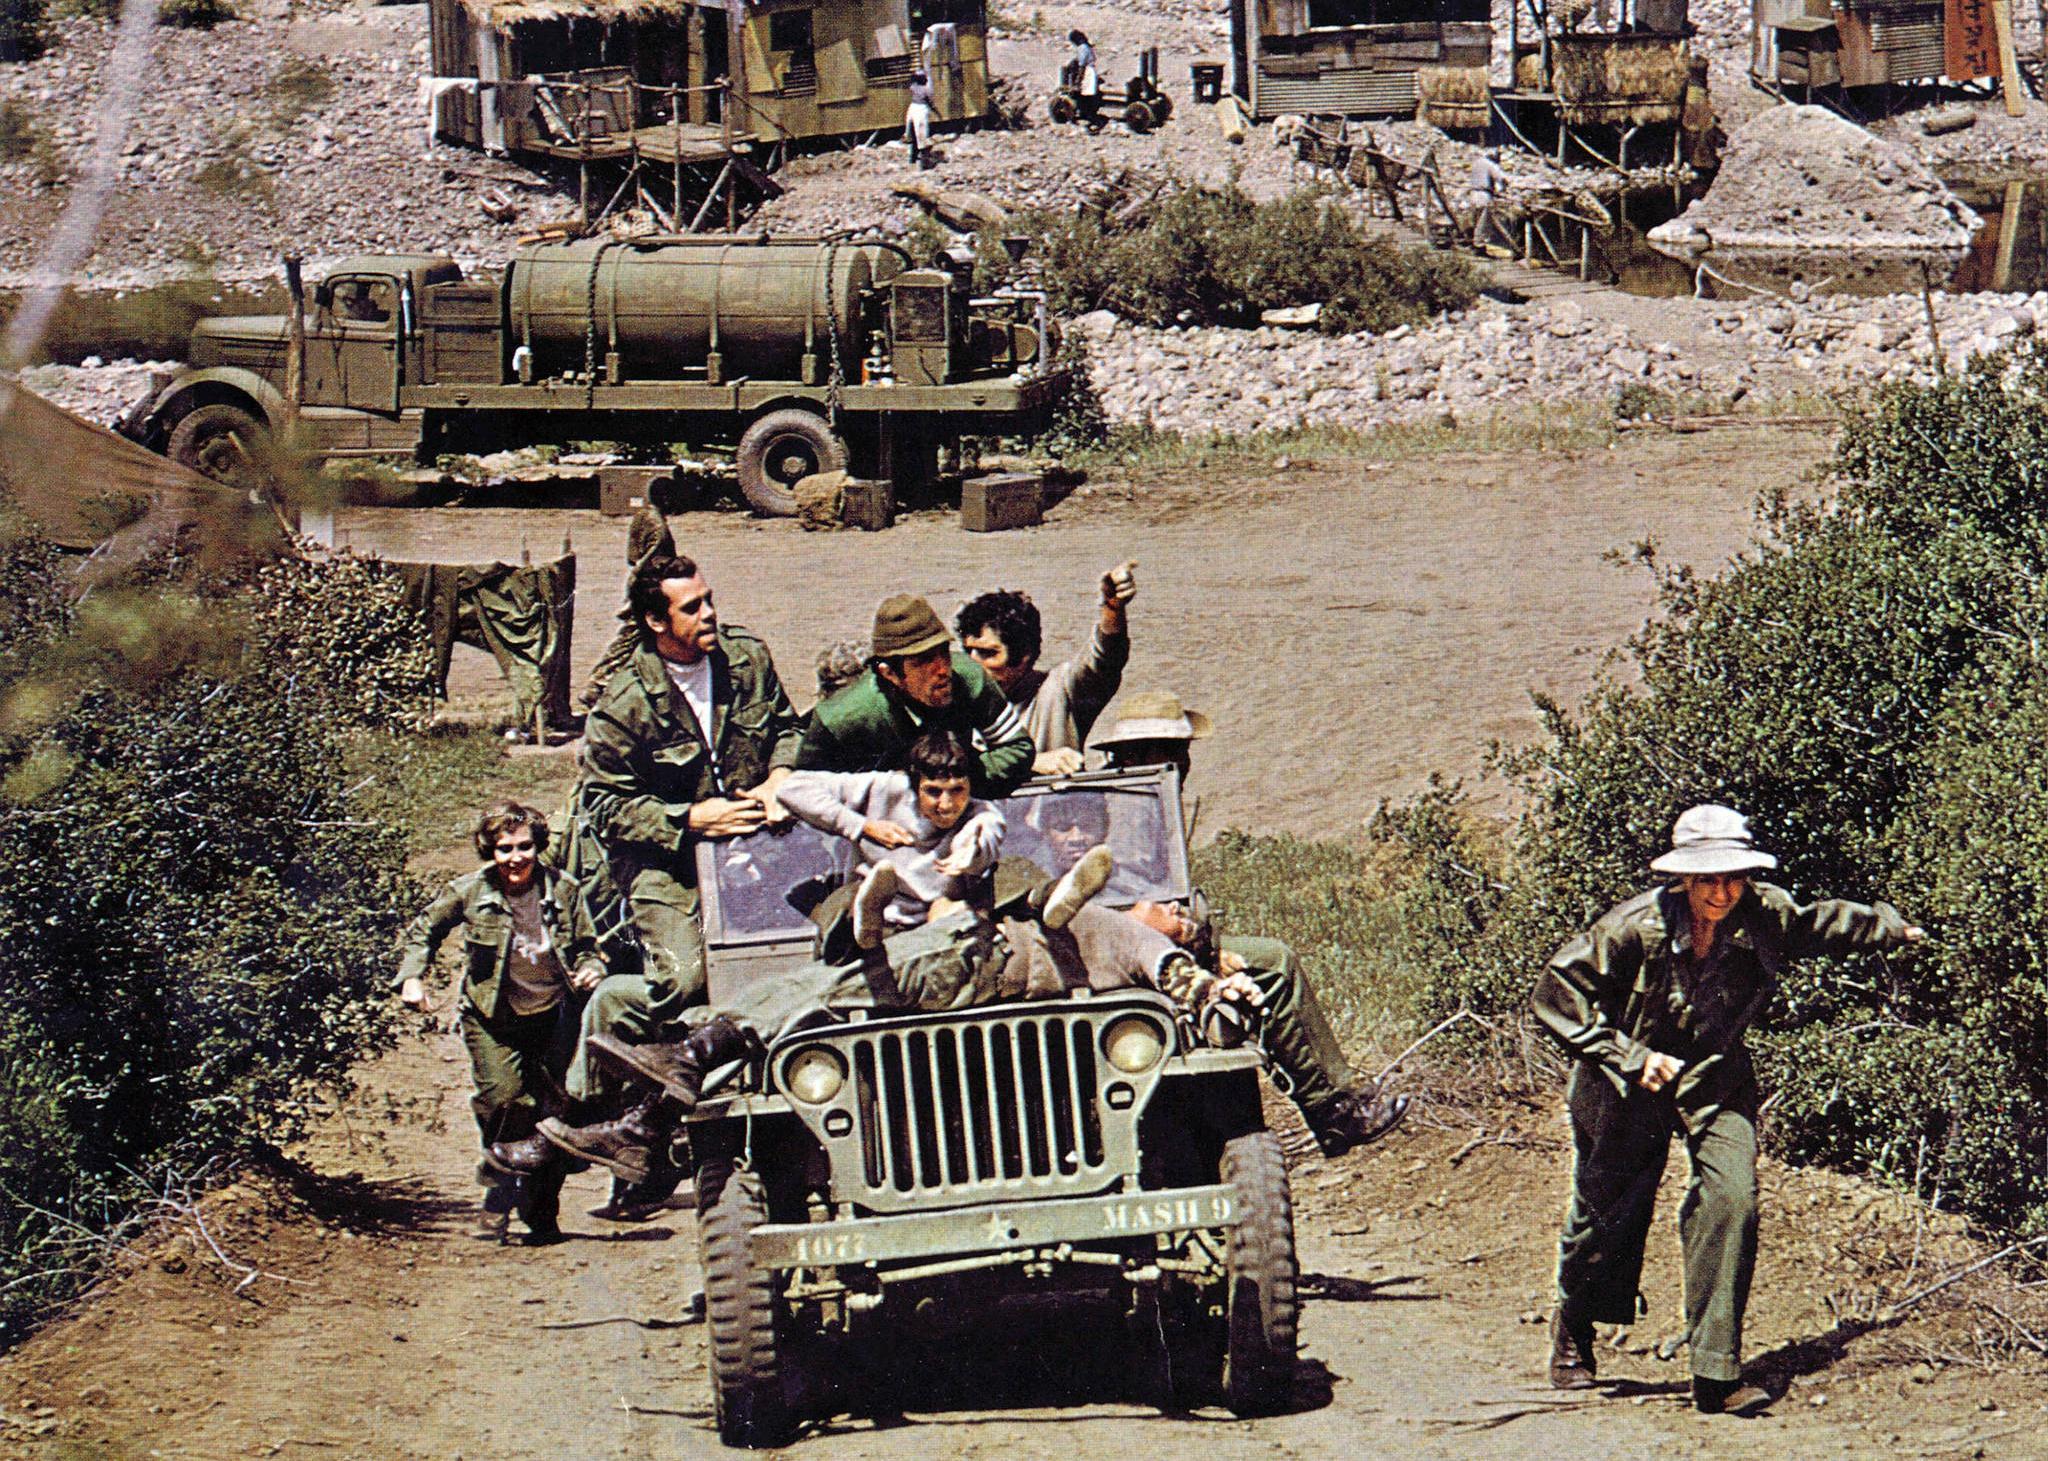 Military members piled into and running with an army jeep uphill.